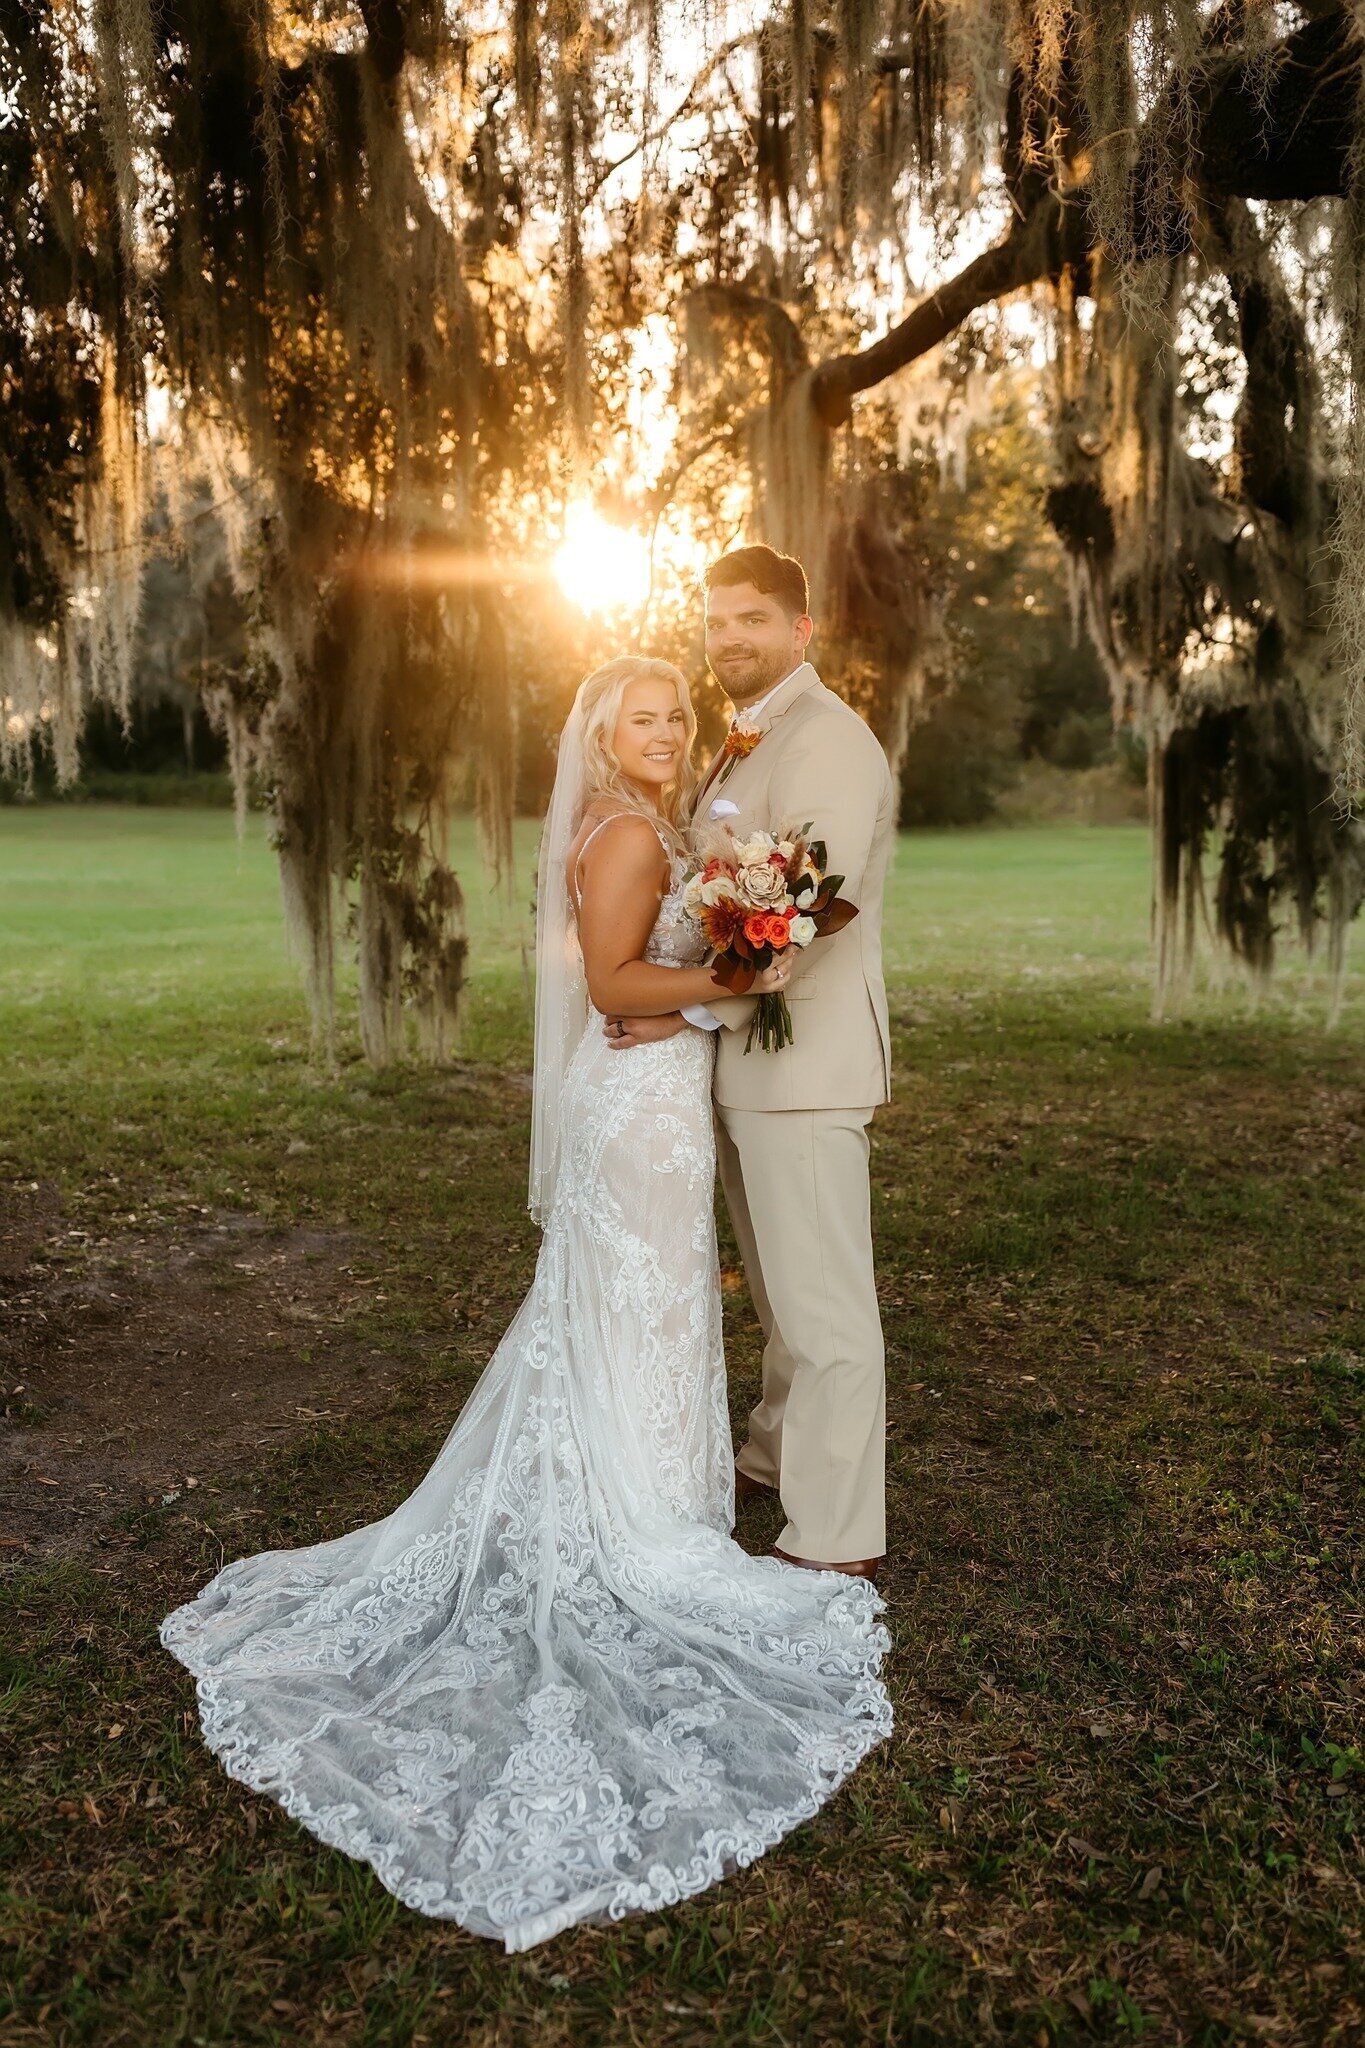 Legacy at Oak Meadows Wedding Venue - Pierson - Gainesville Florida - Weddings and Events43